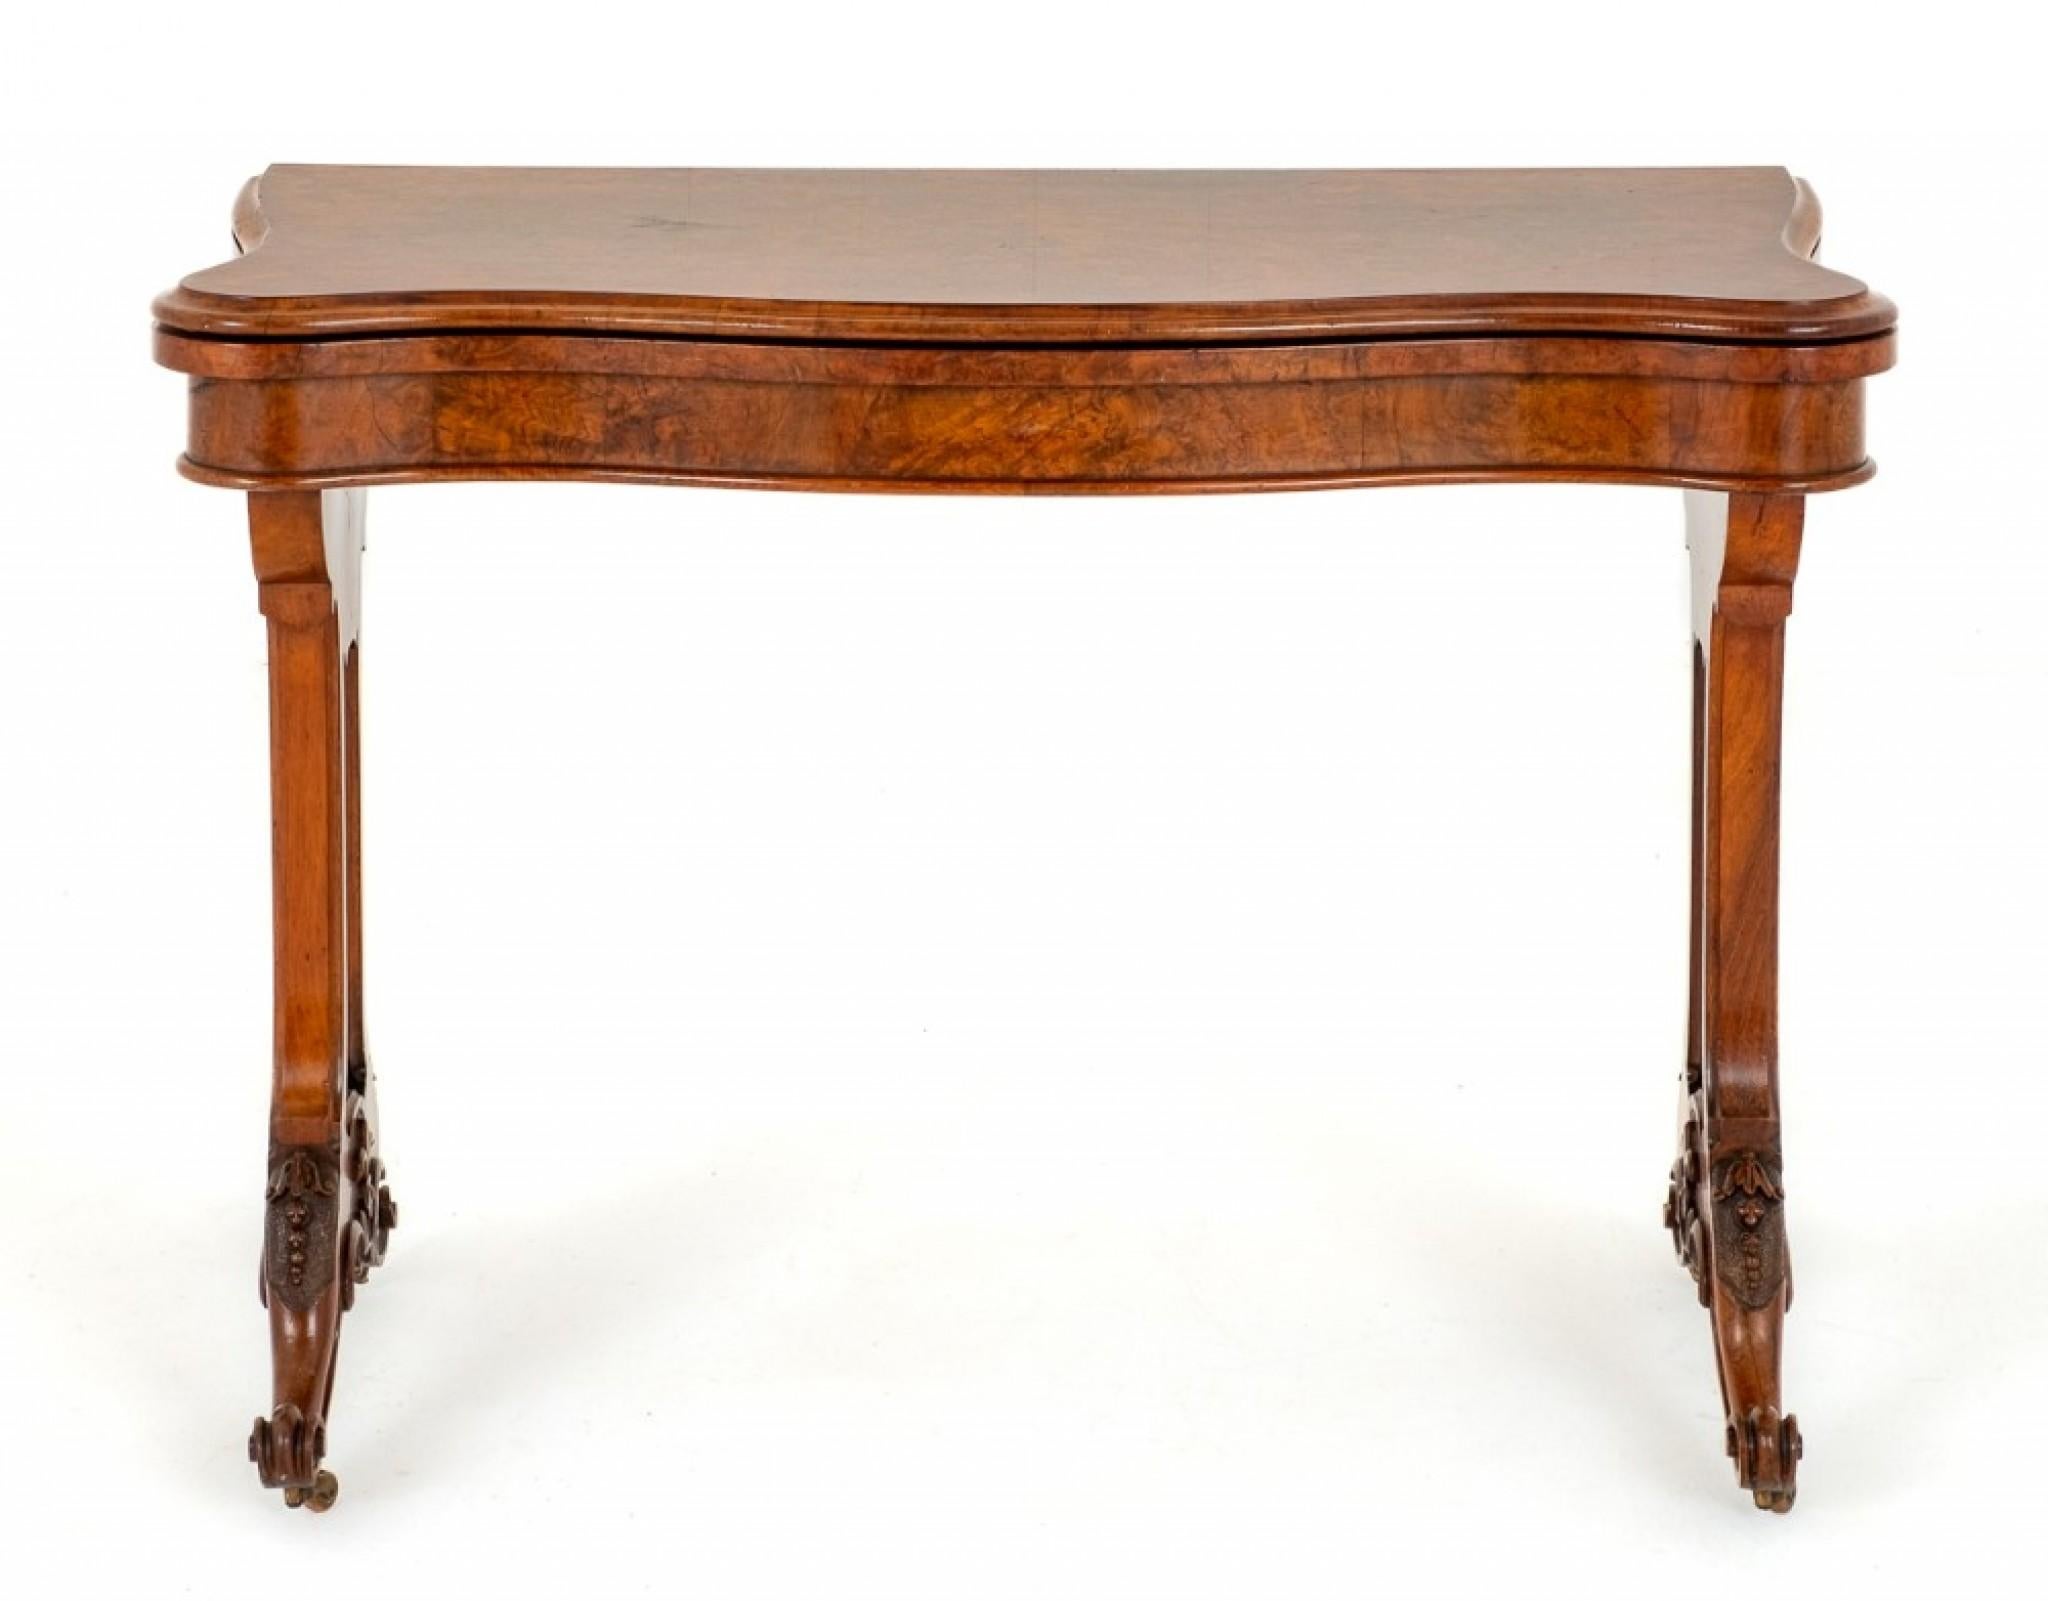 Victorian Burr walnut Card table.
Circa 1860
This Table is Raised upon Shaped Supports with Carved Knees and Carved Toes.
The Supports Feature Pierced Fret Work.
The Top of the Table is of a Serpentine Form and Opens to Reveal a Baize Playing